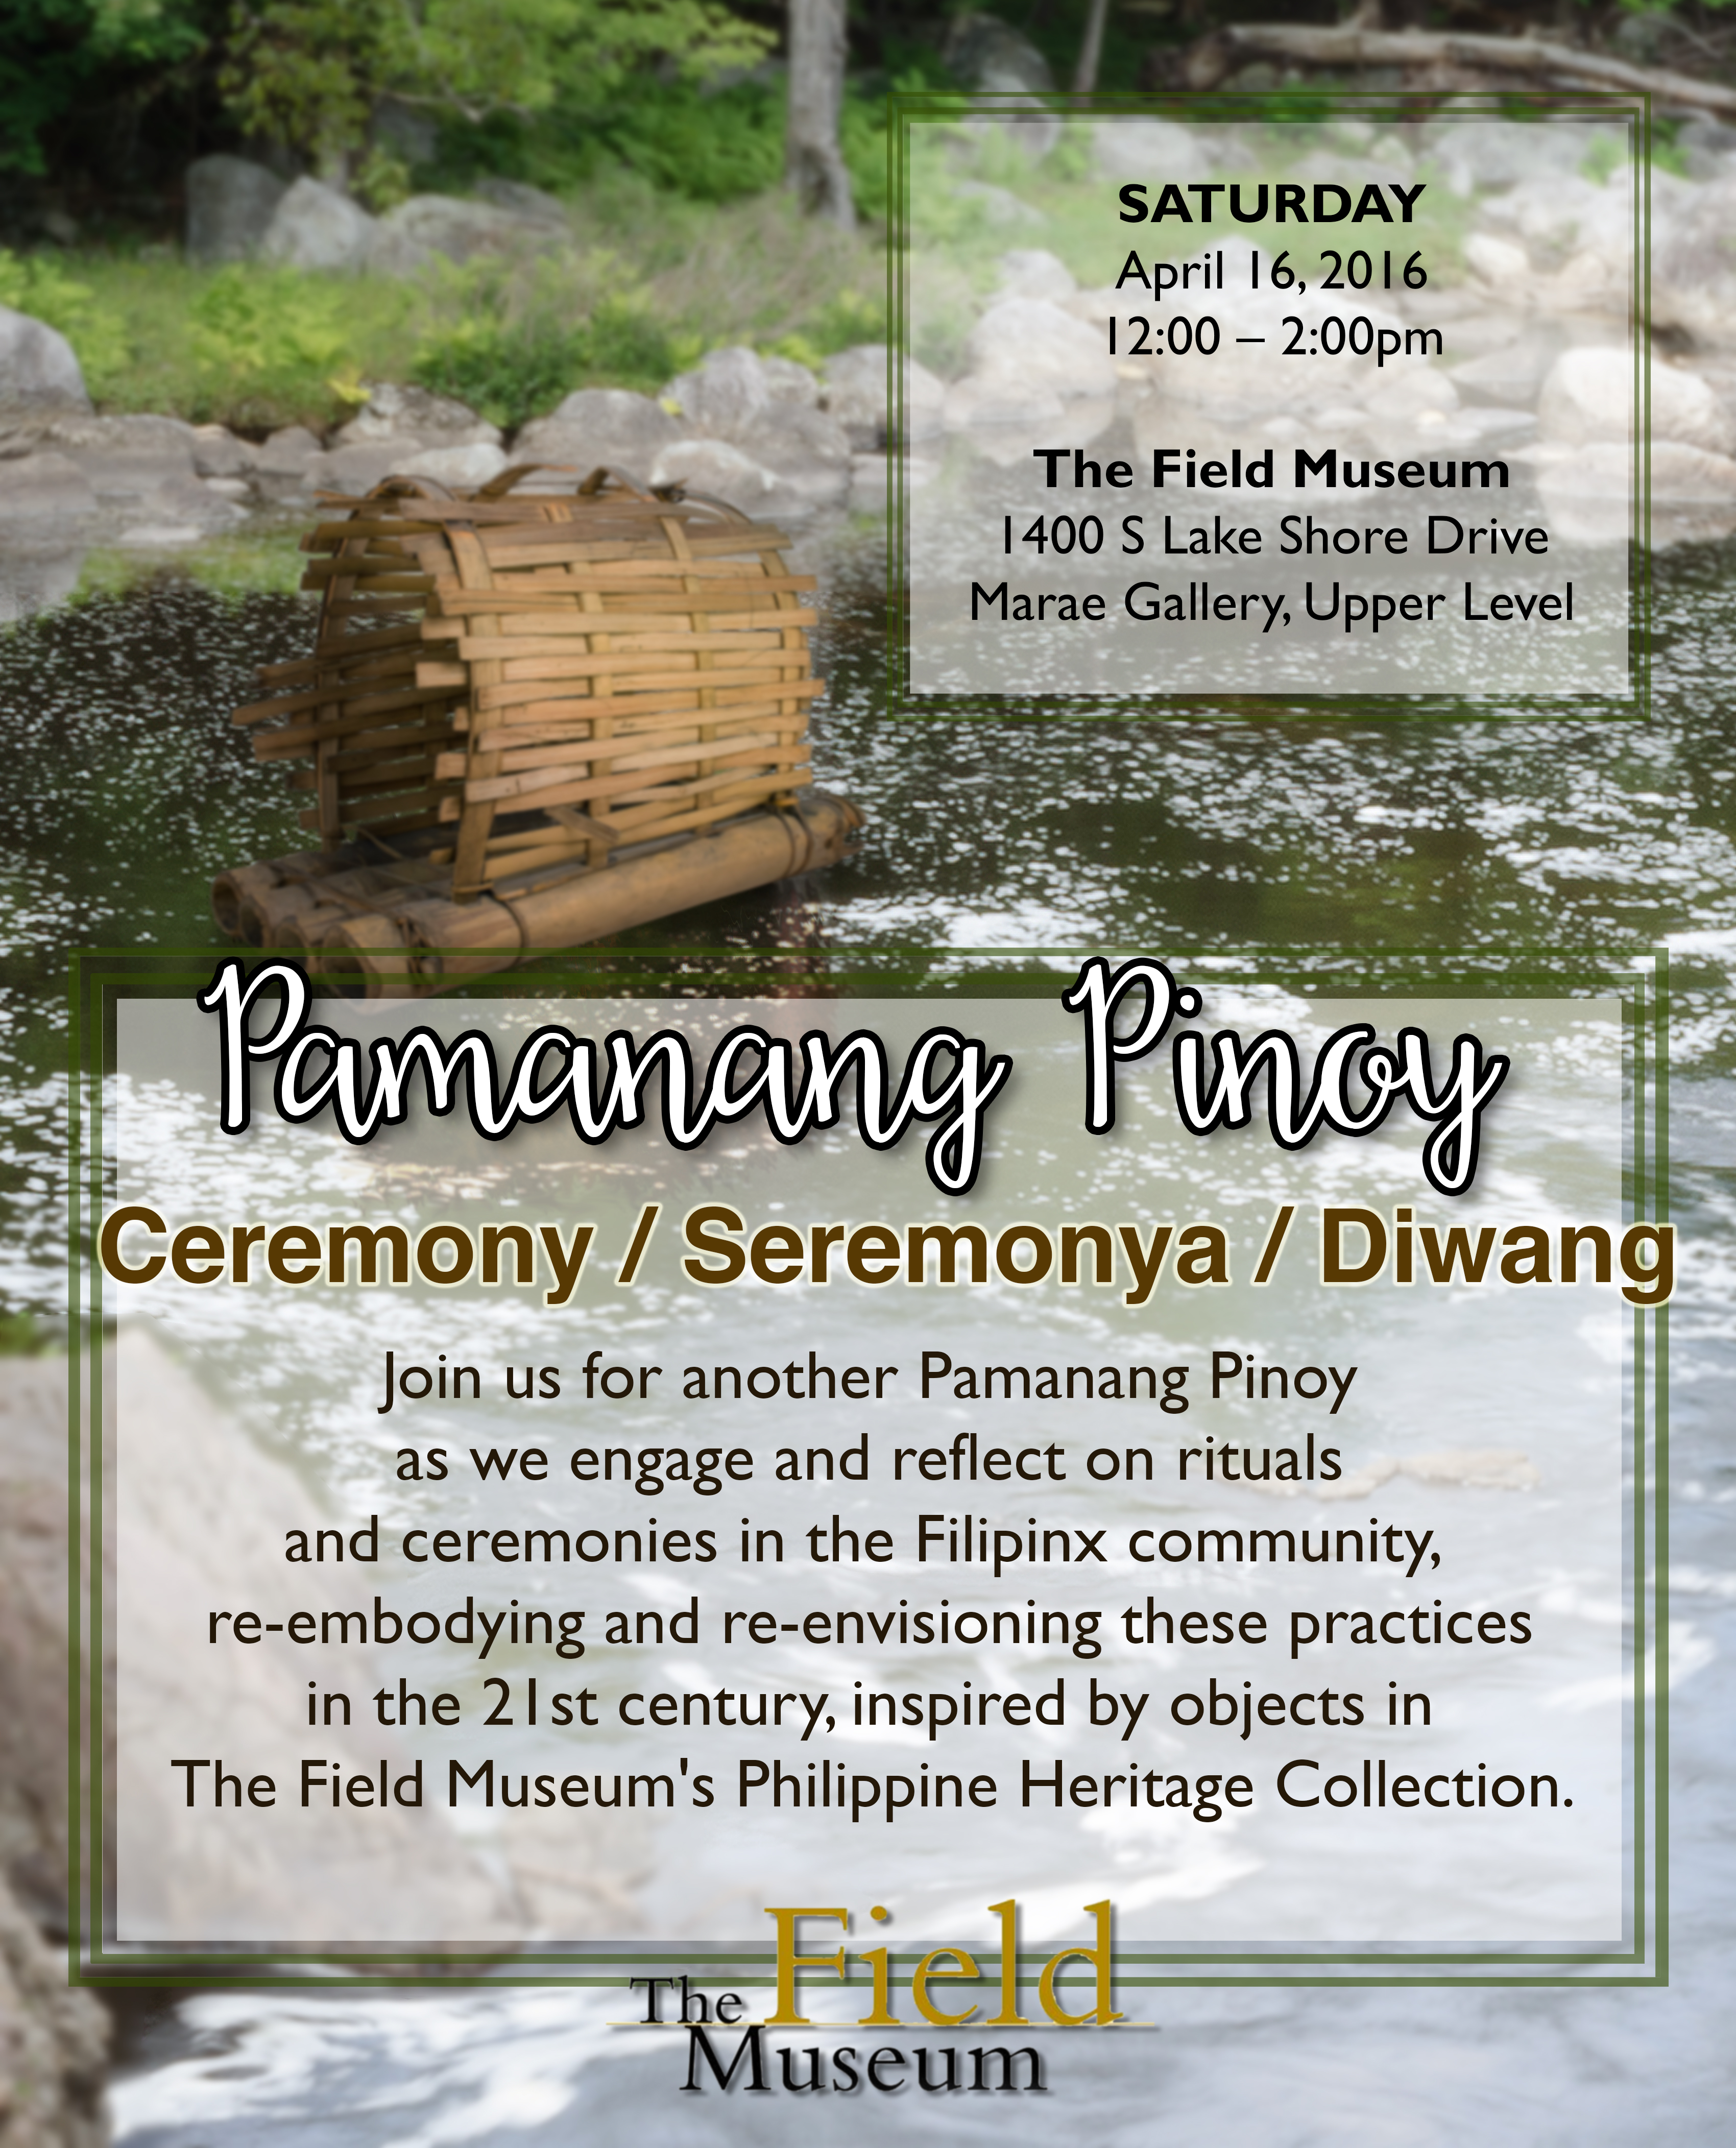 Event flier for Pamanang Pinoy: Ceremony 